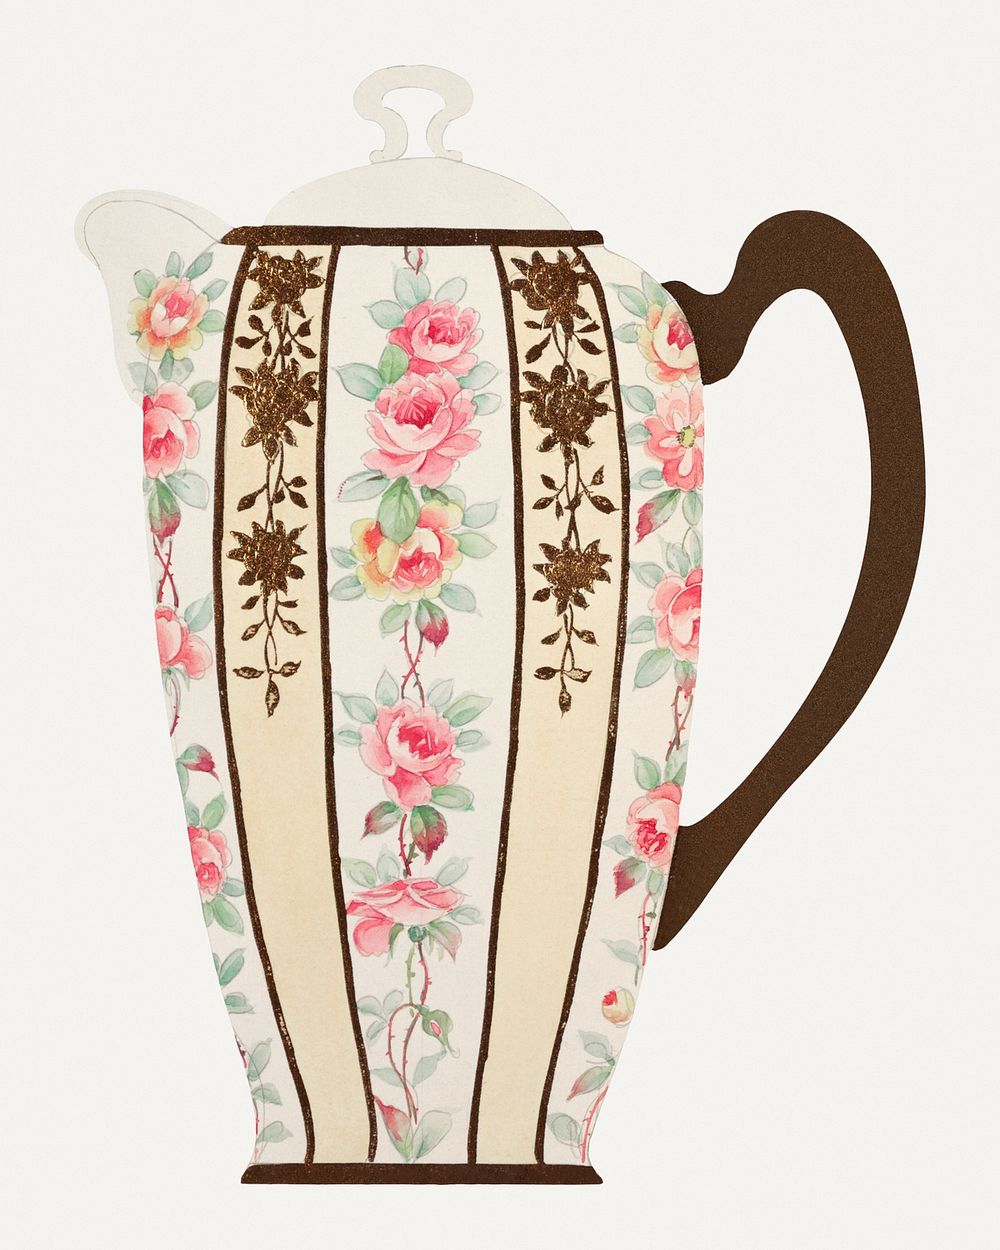 Vintage flowers and leaves psd pitcher, remixed from Noritake factory china porcelain tableware design